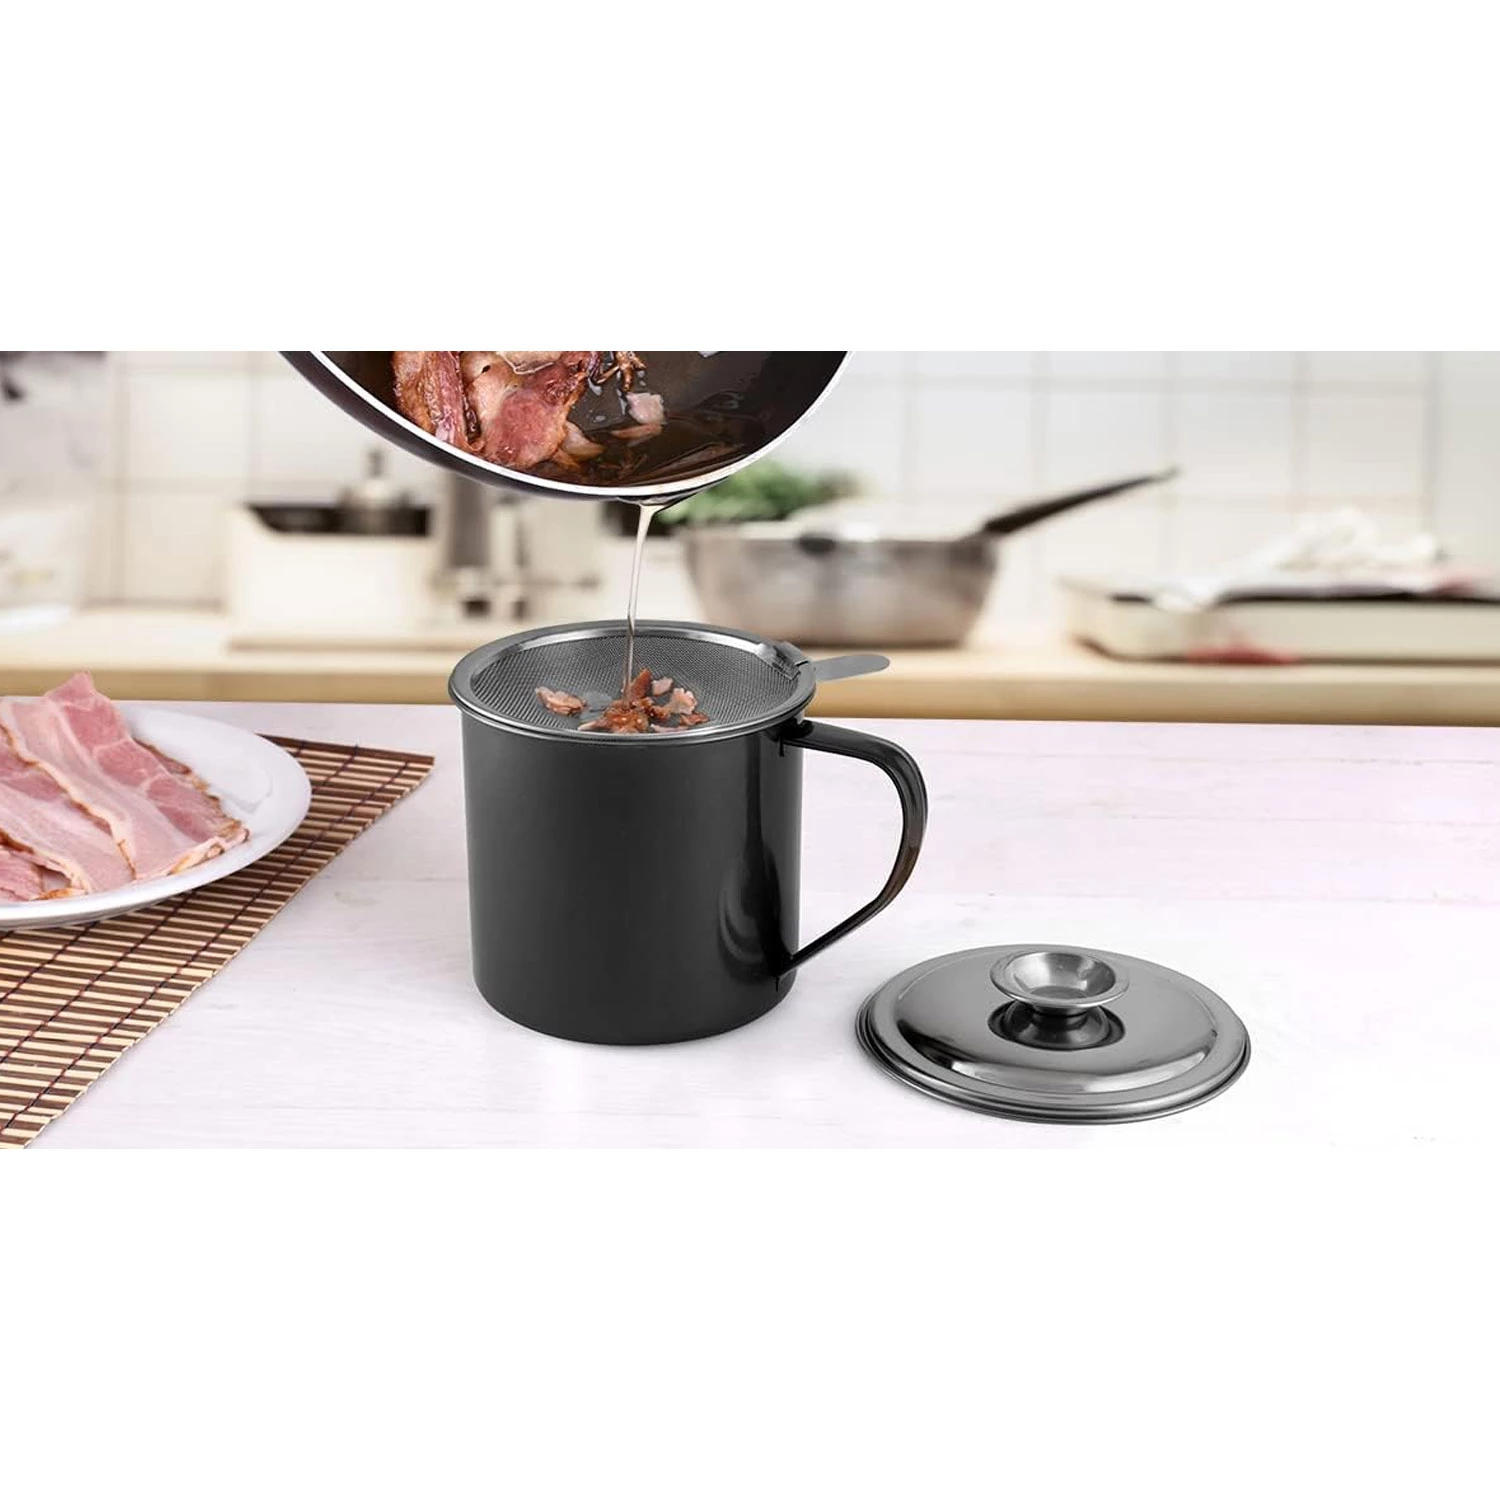 Bacon Grease Container With Strainer And Lid